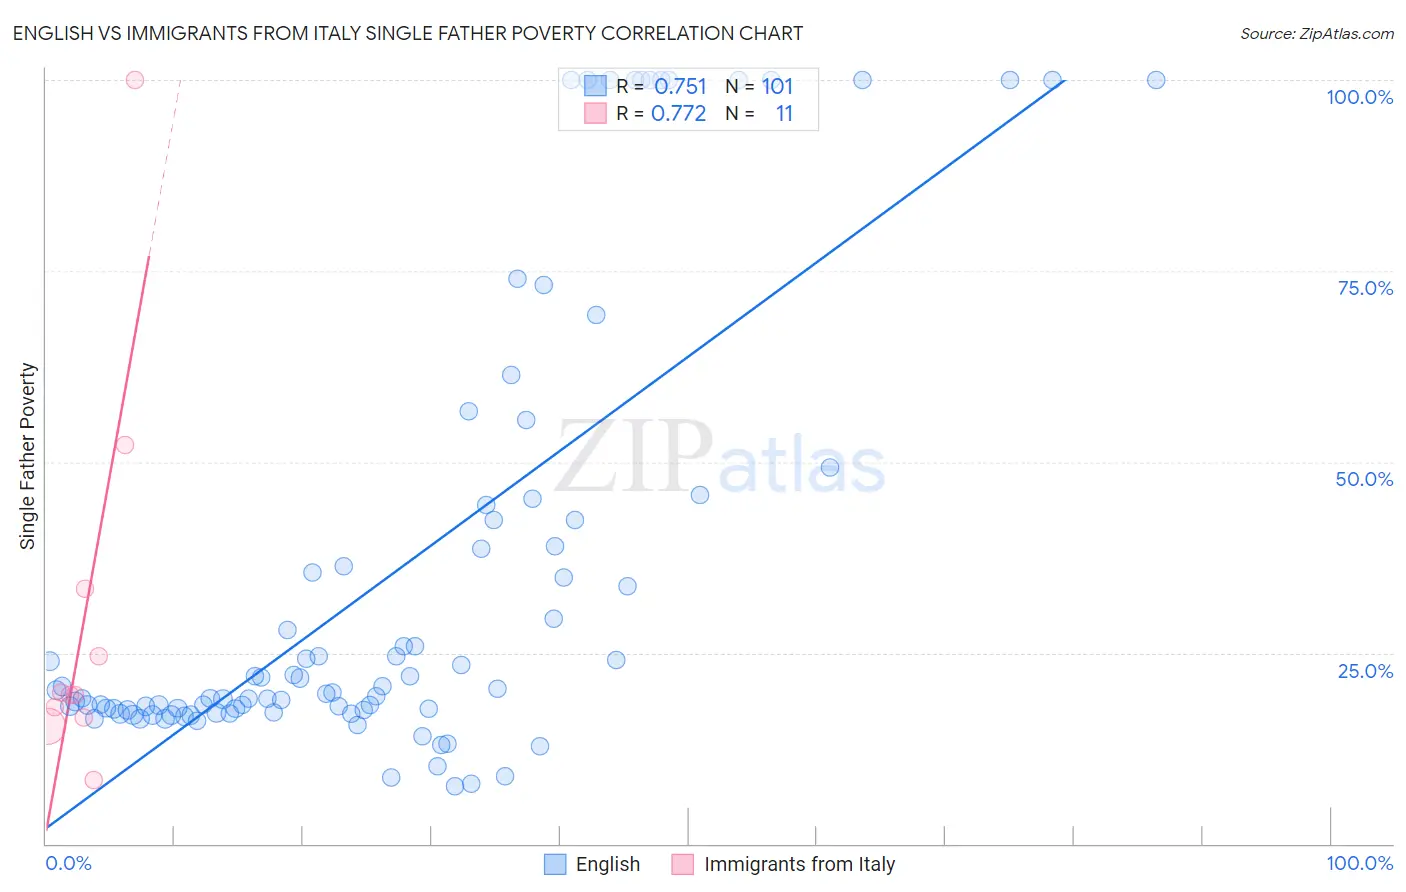 English vs Immigrants from Italy Single Father Poverty